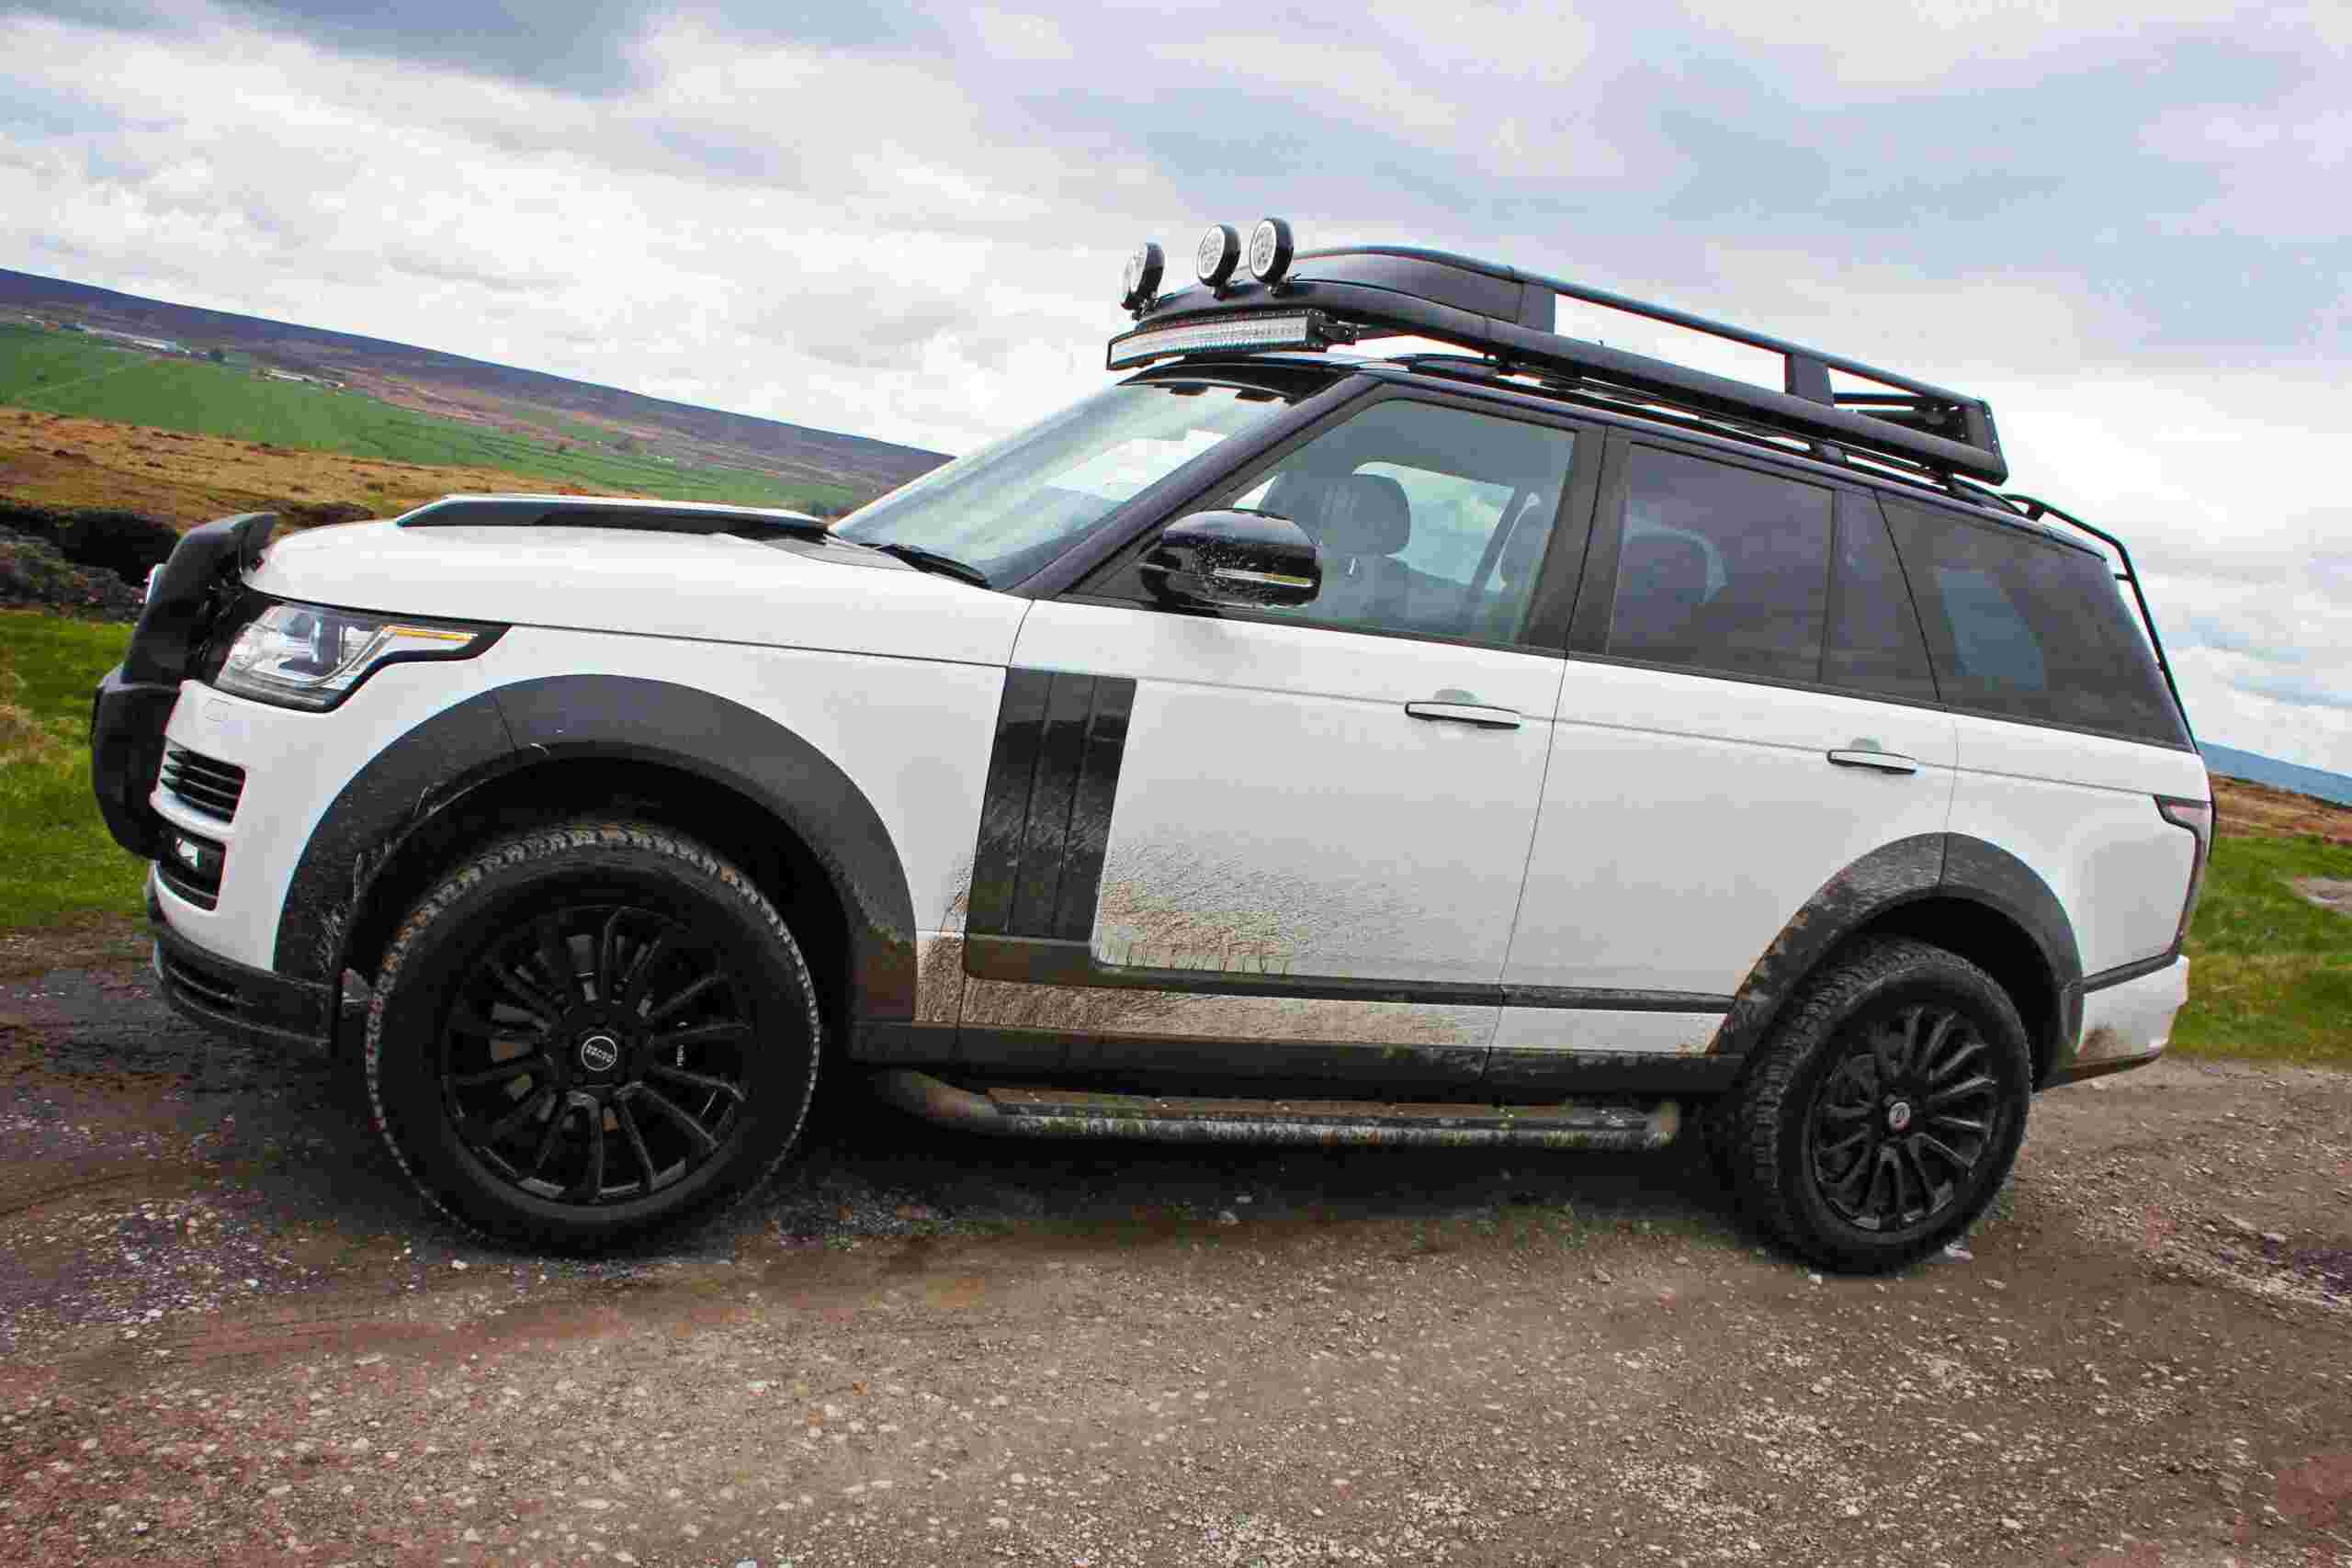 Check our price and buy Barugzai Windermere body kit for Land Rover Range Rover Vogue